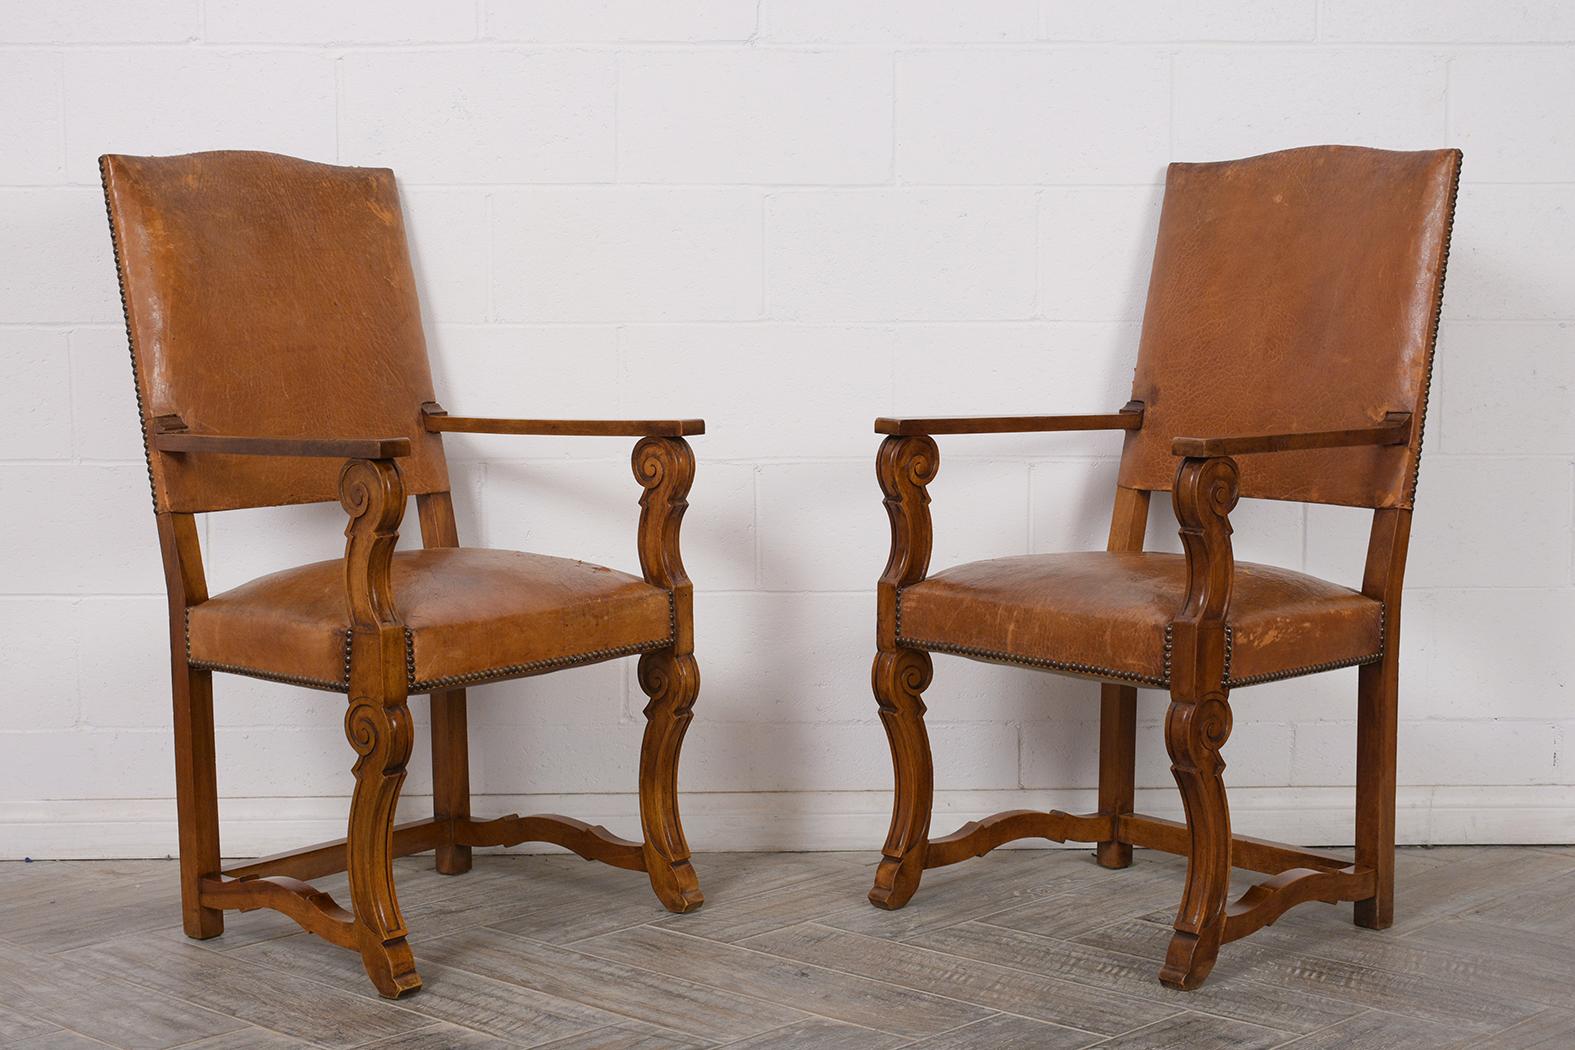 Pair of 1880s armchairs, solid walnut wood frames, with original dark walnut finish. They have high backs, with carved front arms, and stretched carved legs. Chairs are covered in original dark brown/walnut color leather, with nail-head trims.